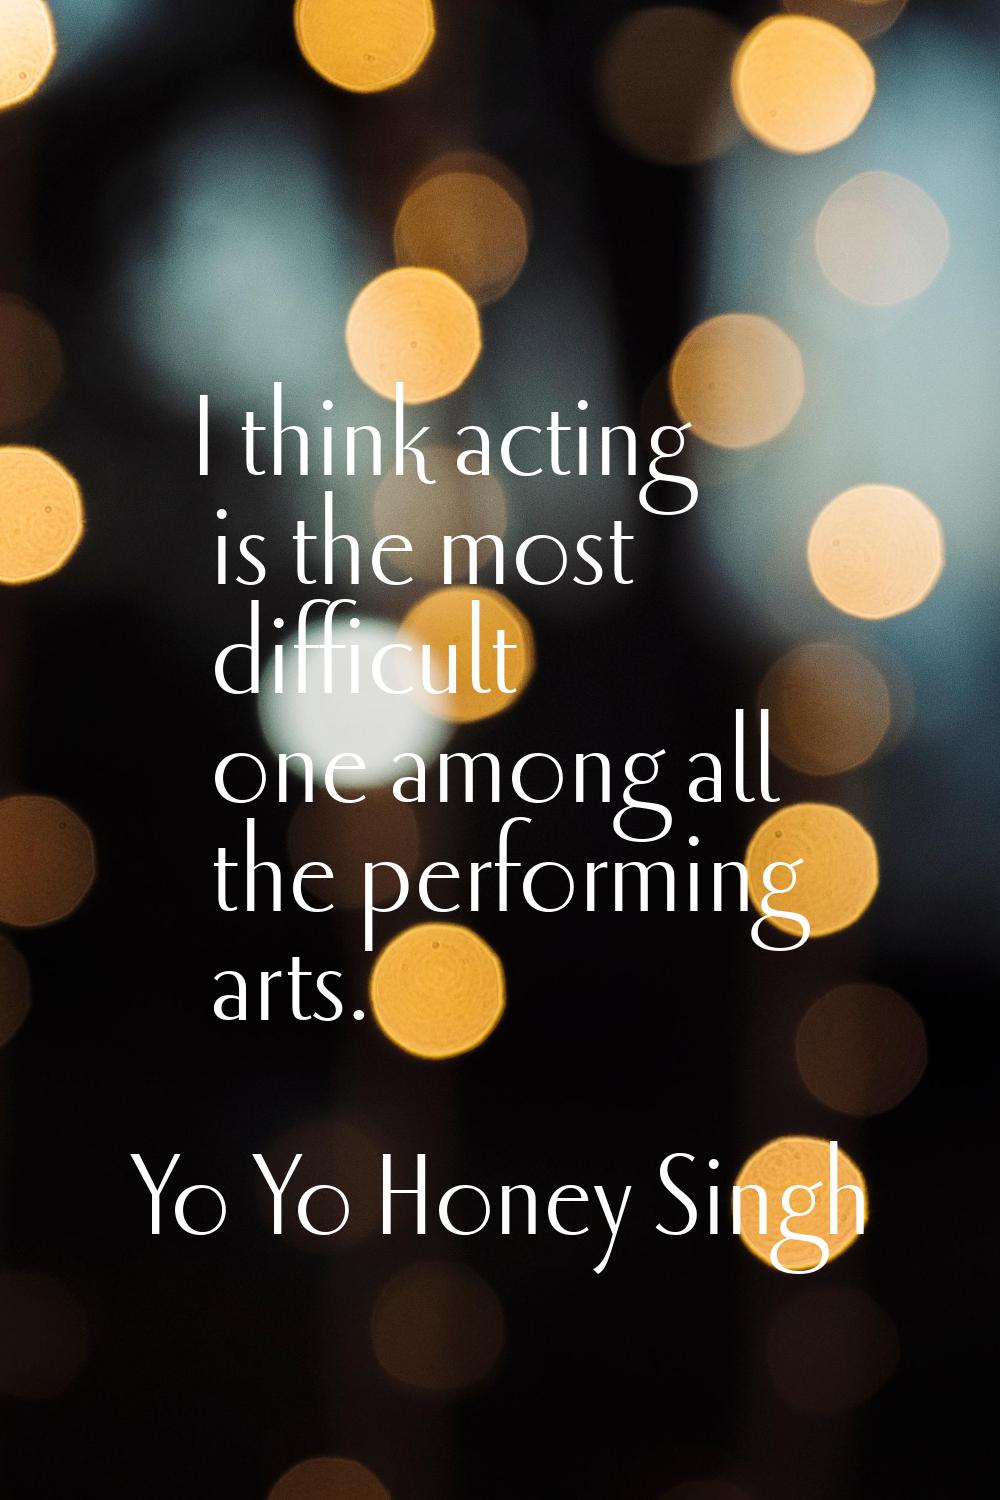 I think acting is the most difficult one among all the performing arts.